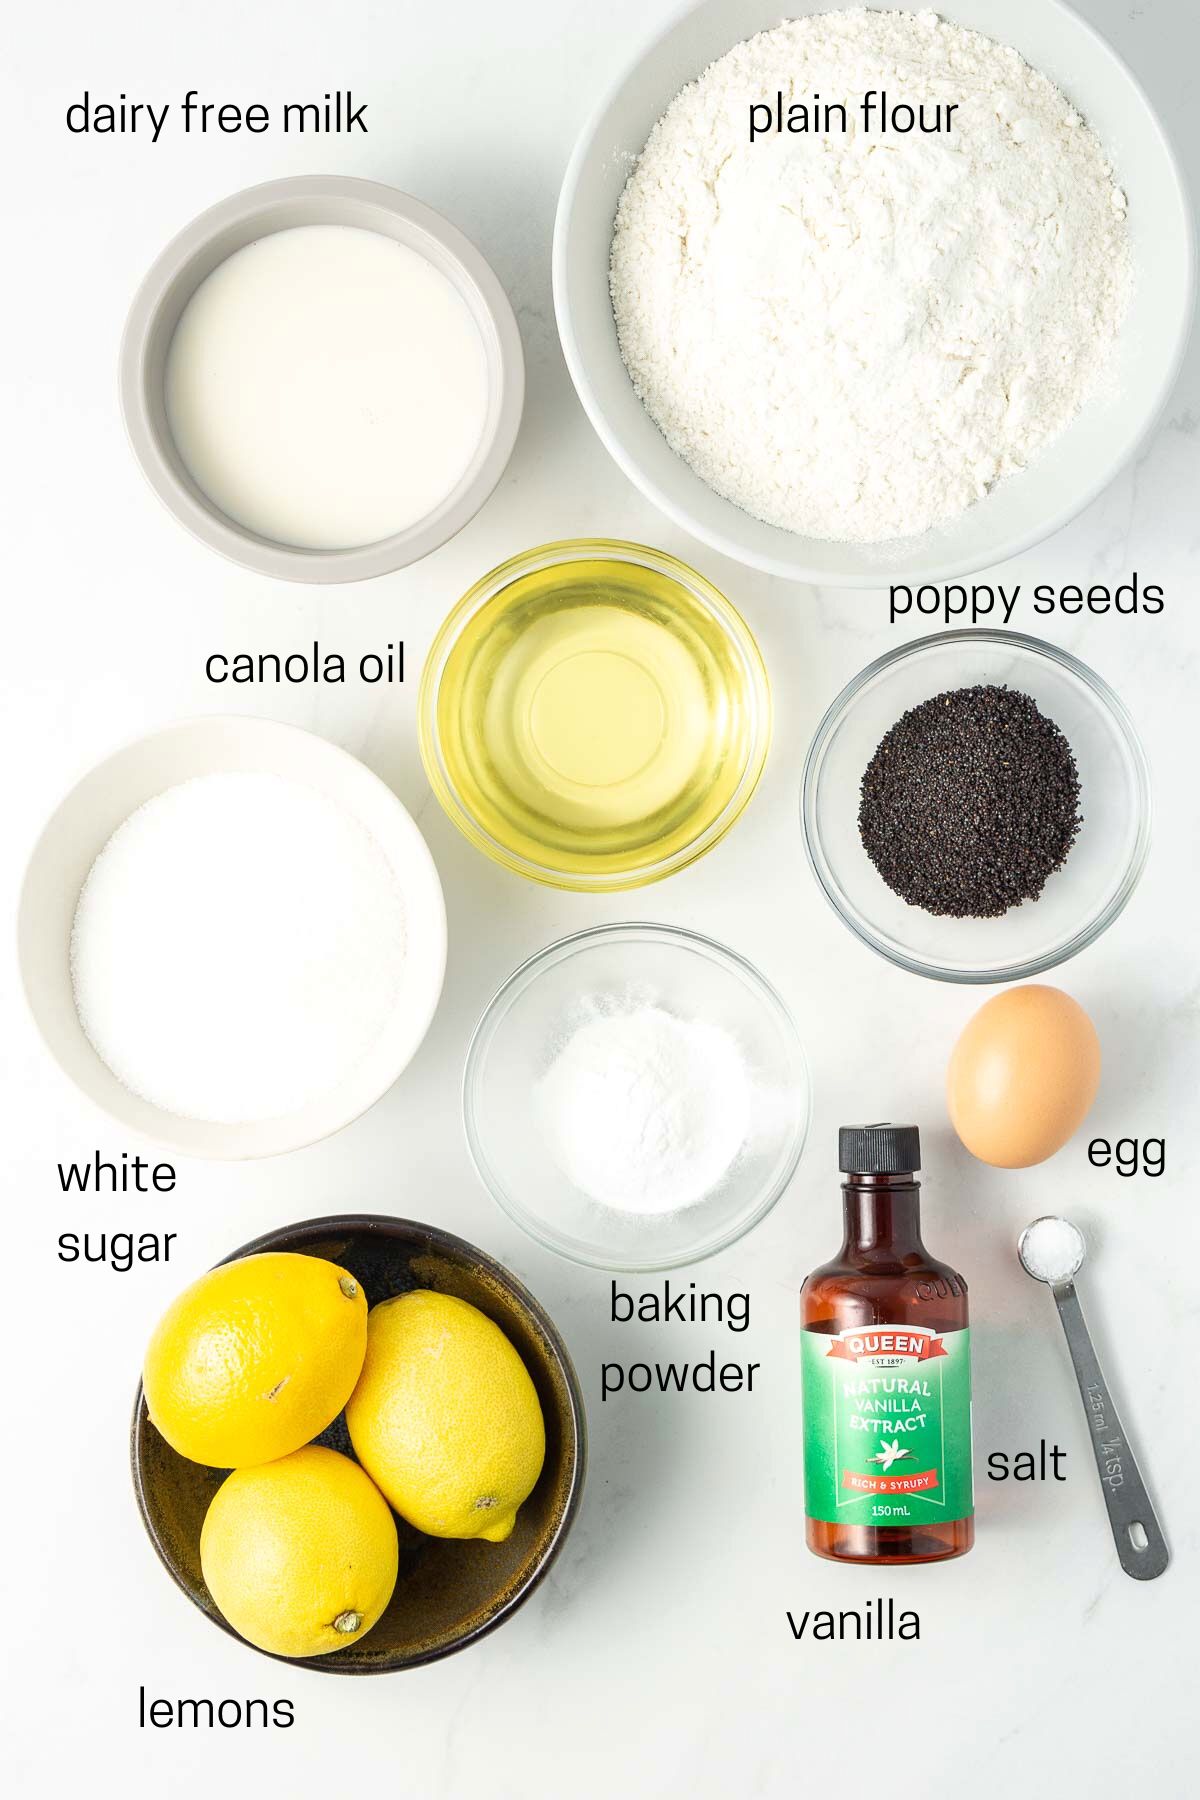 All ingredients needed for lemon poppy seed muffins laid out in small bowls.